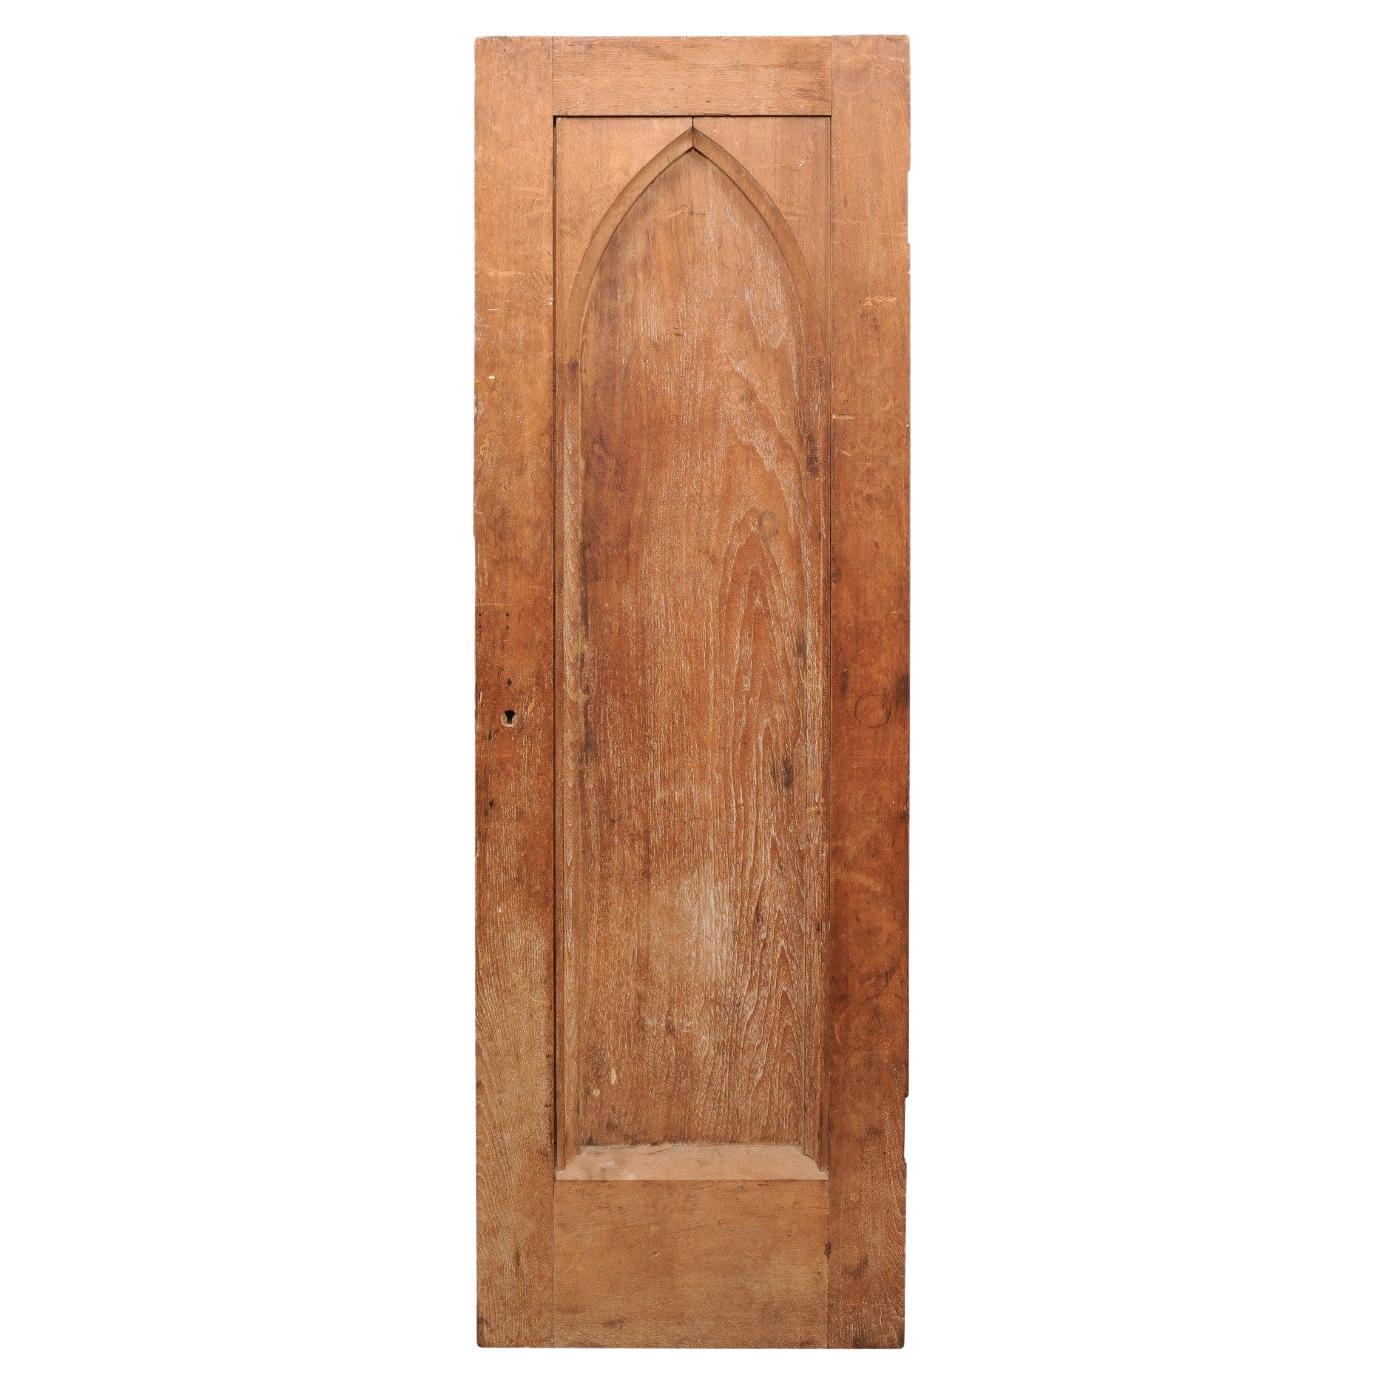  Late 19th Century Wooden Door with Gothic Style Arch Detail